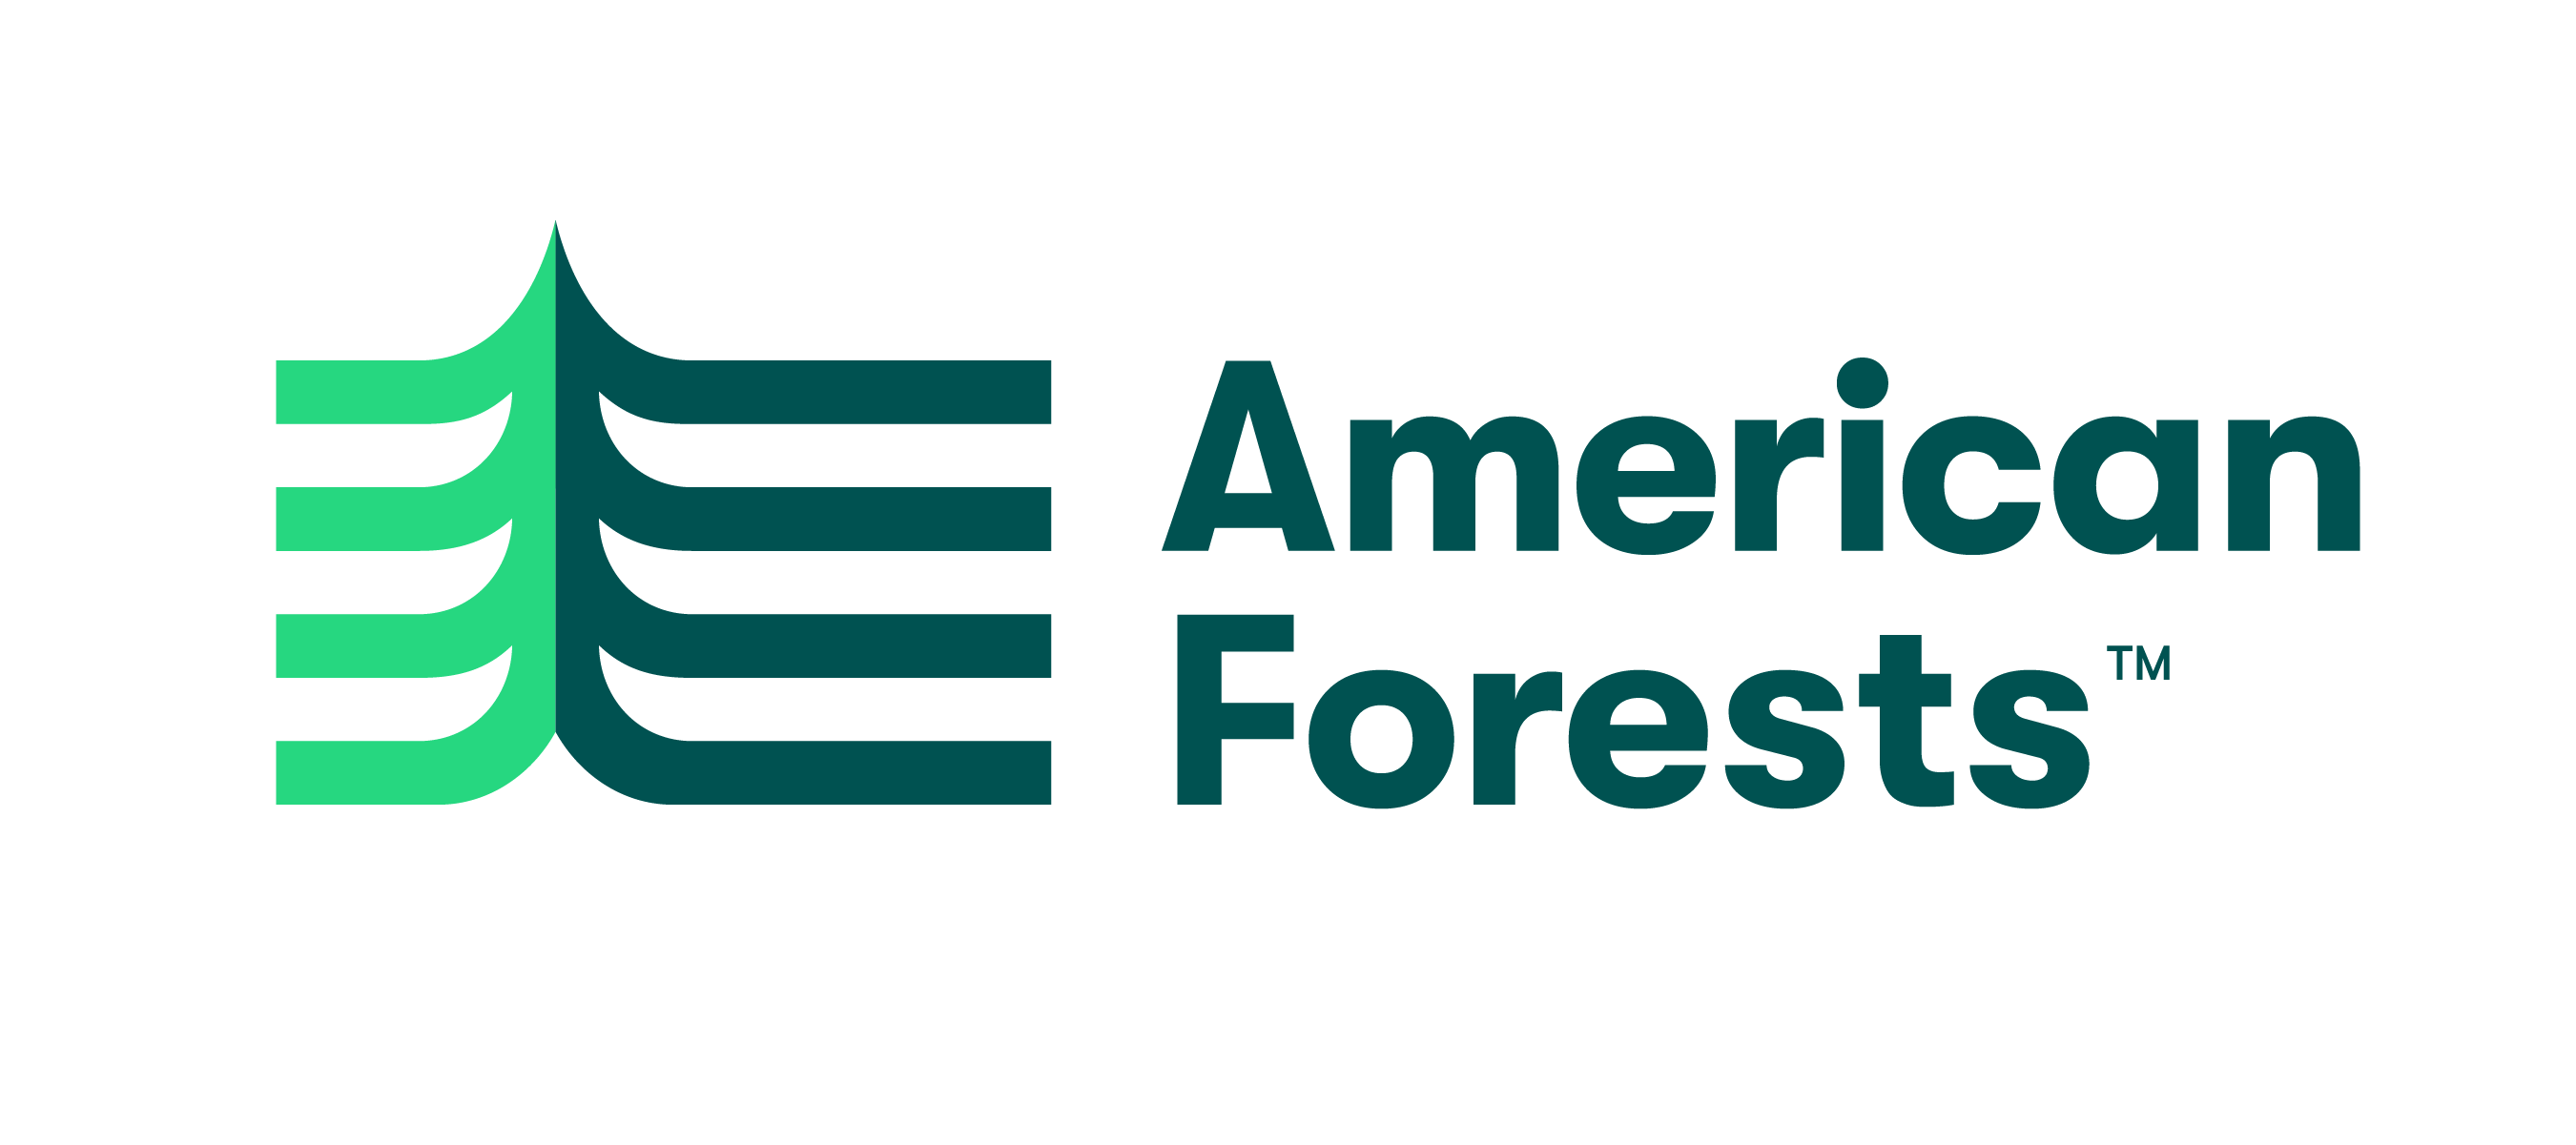 American forests logo